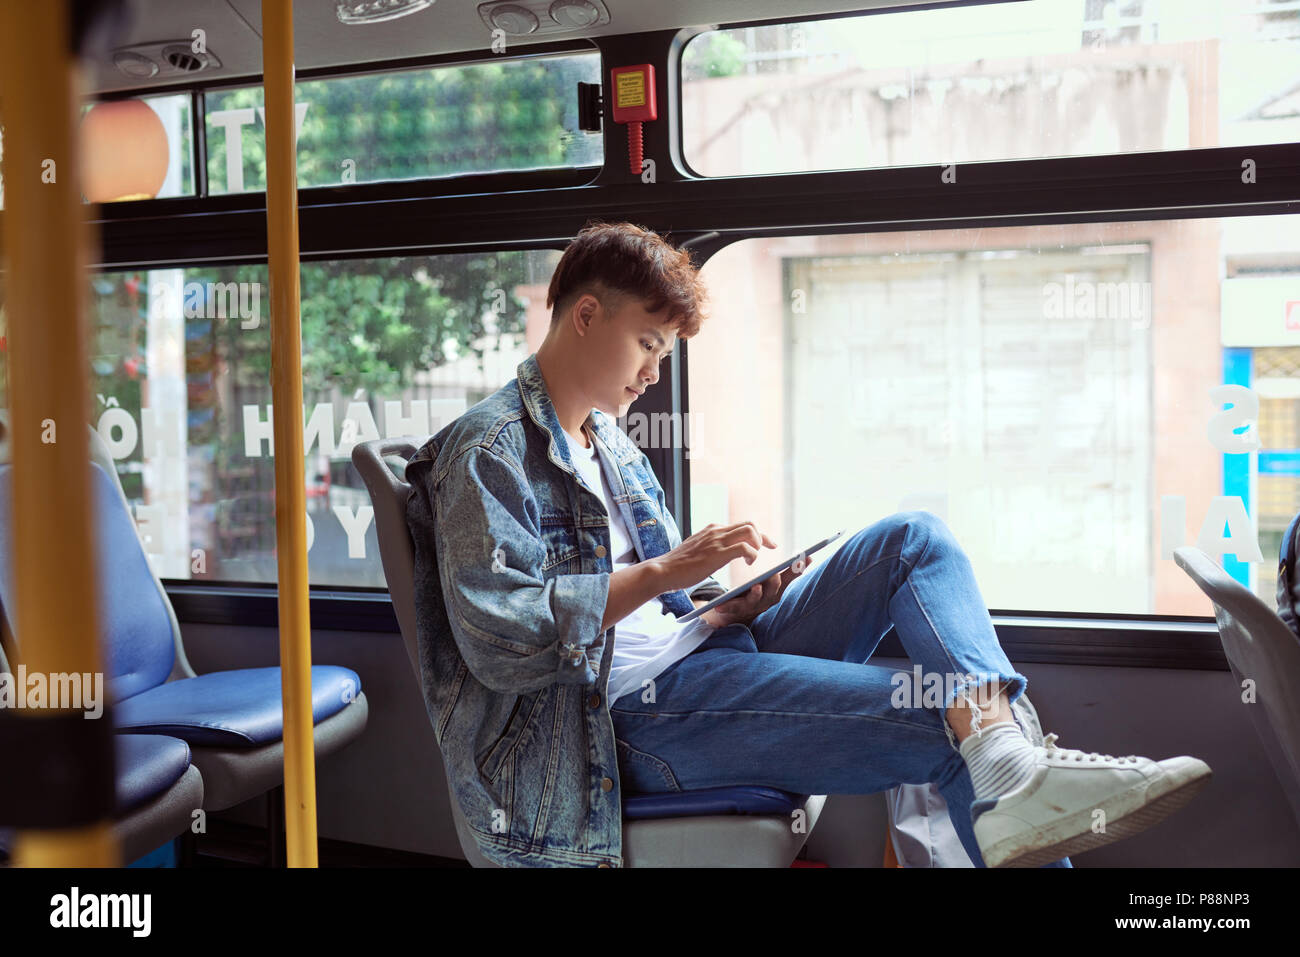 Transport. People in the bus. He reading book in transport. Stock Photo